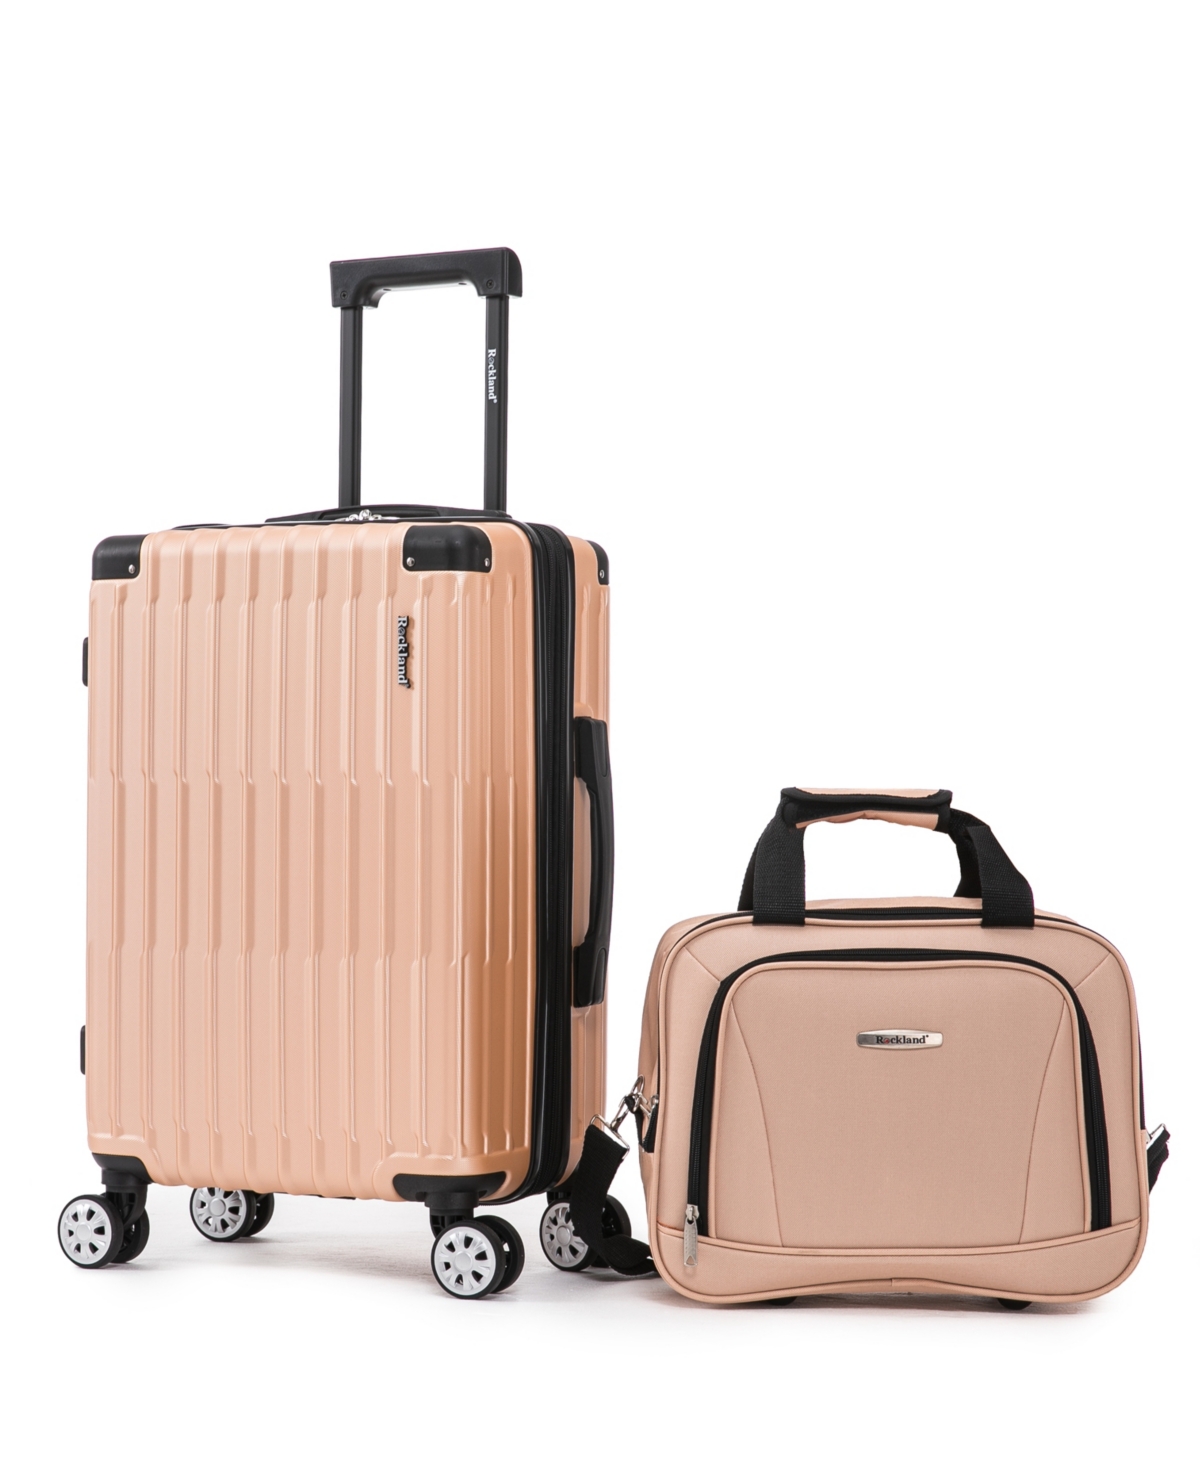 Rockland Napa Valley Luggage Set, 2 Piece In Champagne